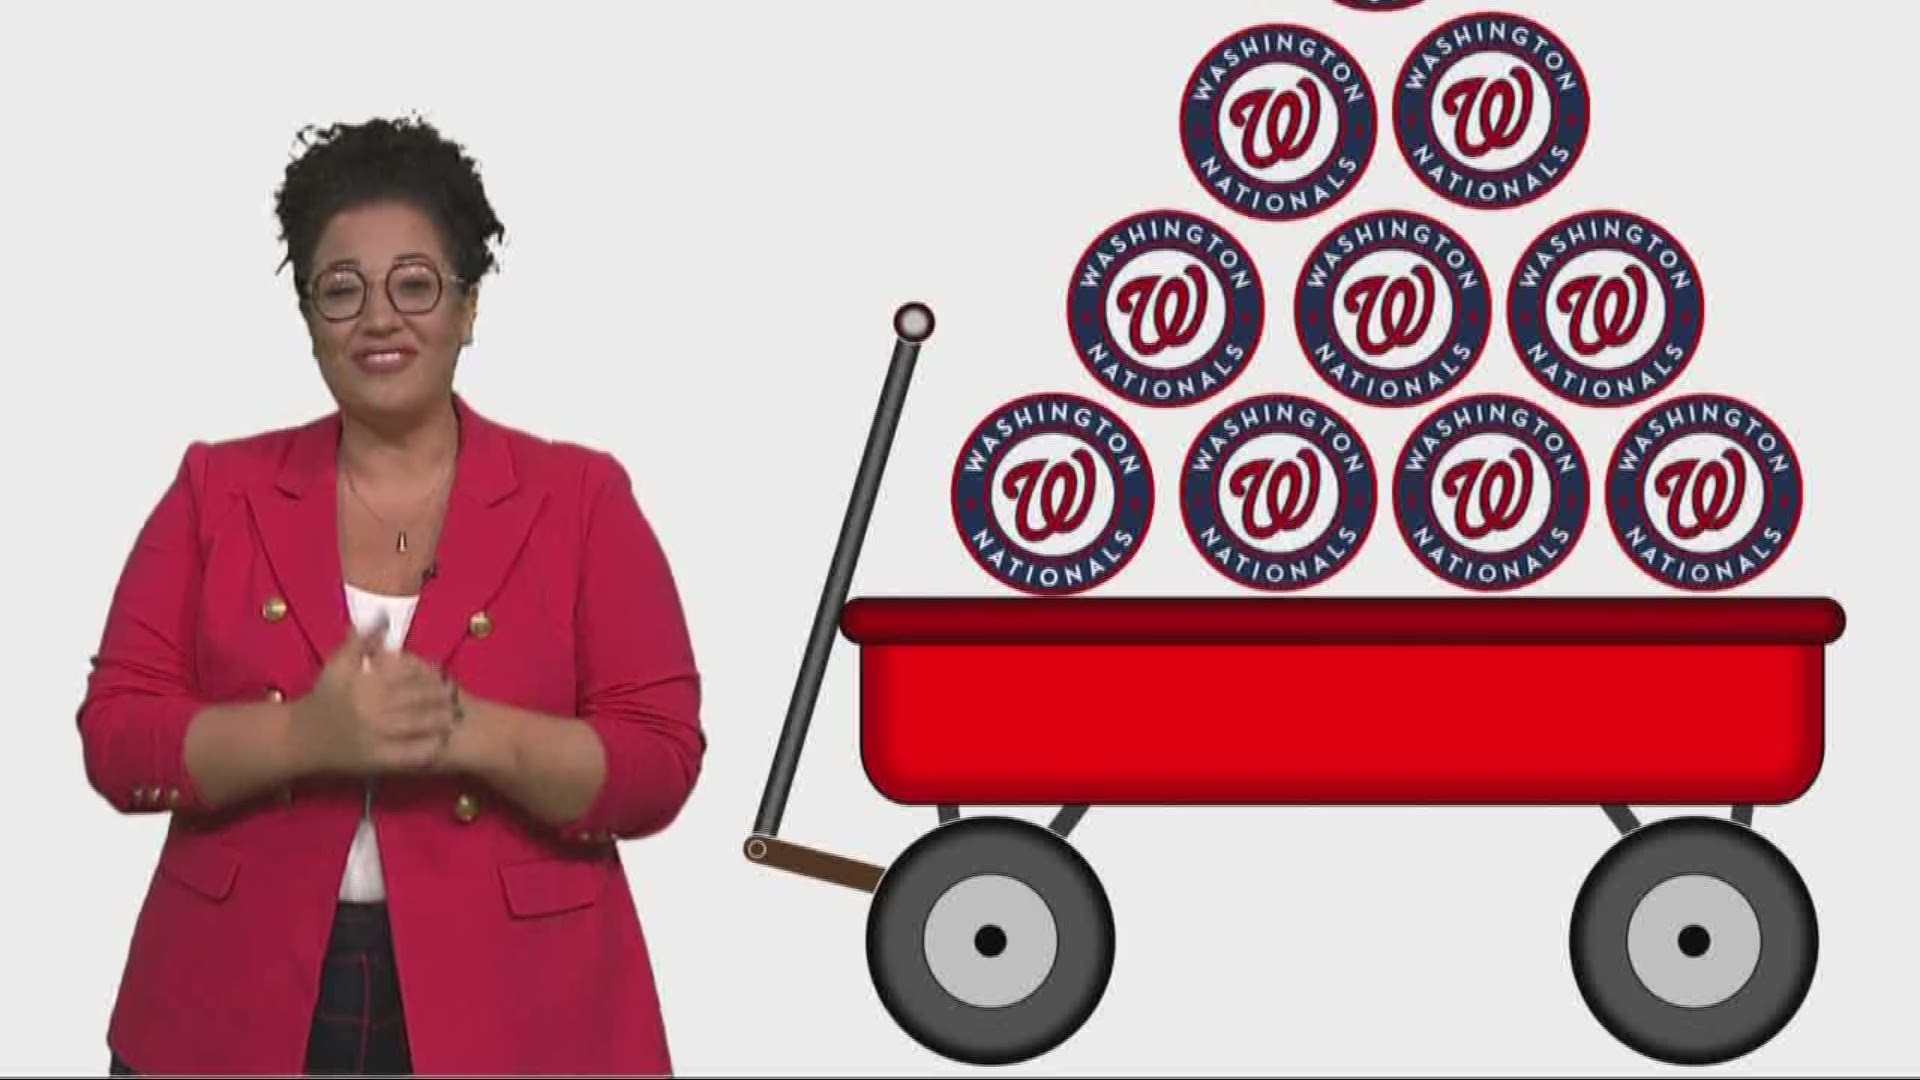 The Nationals are going to the World Series! Ariane Datil set out to test just how devoted Nats fans really are.